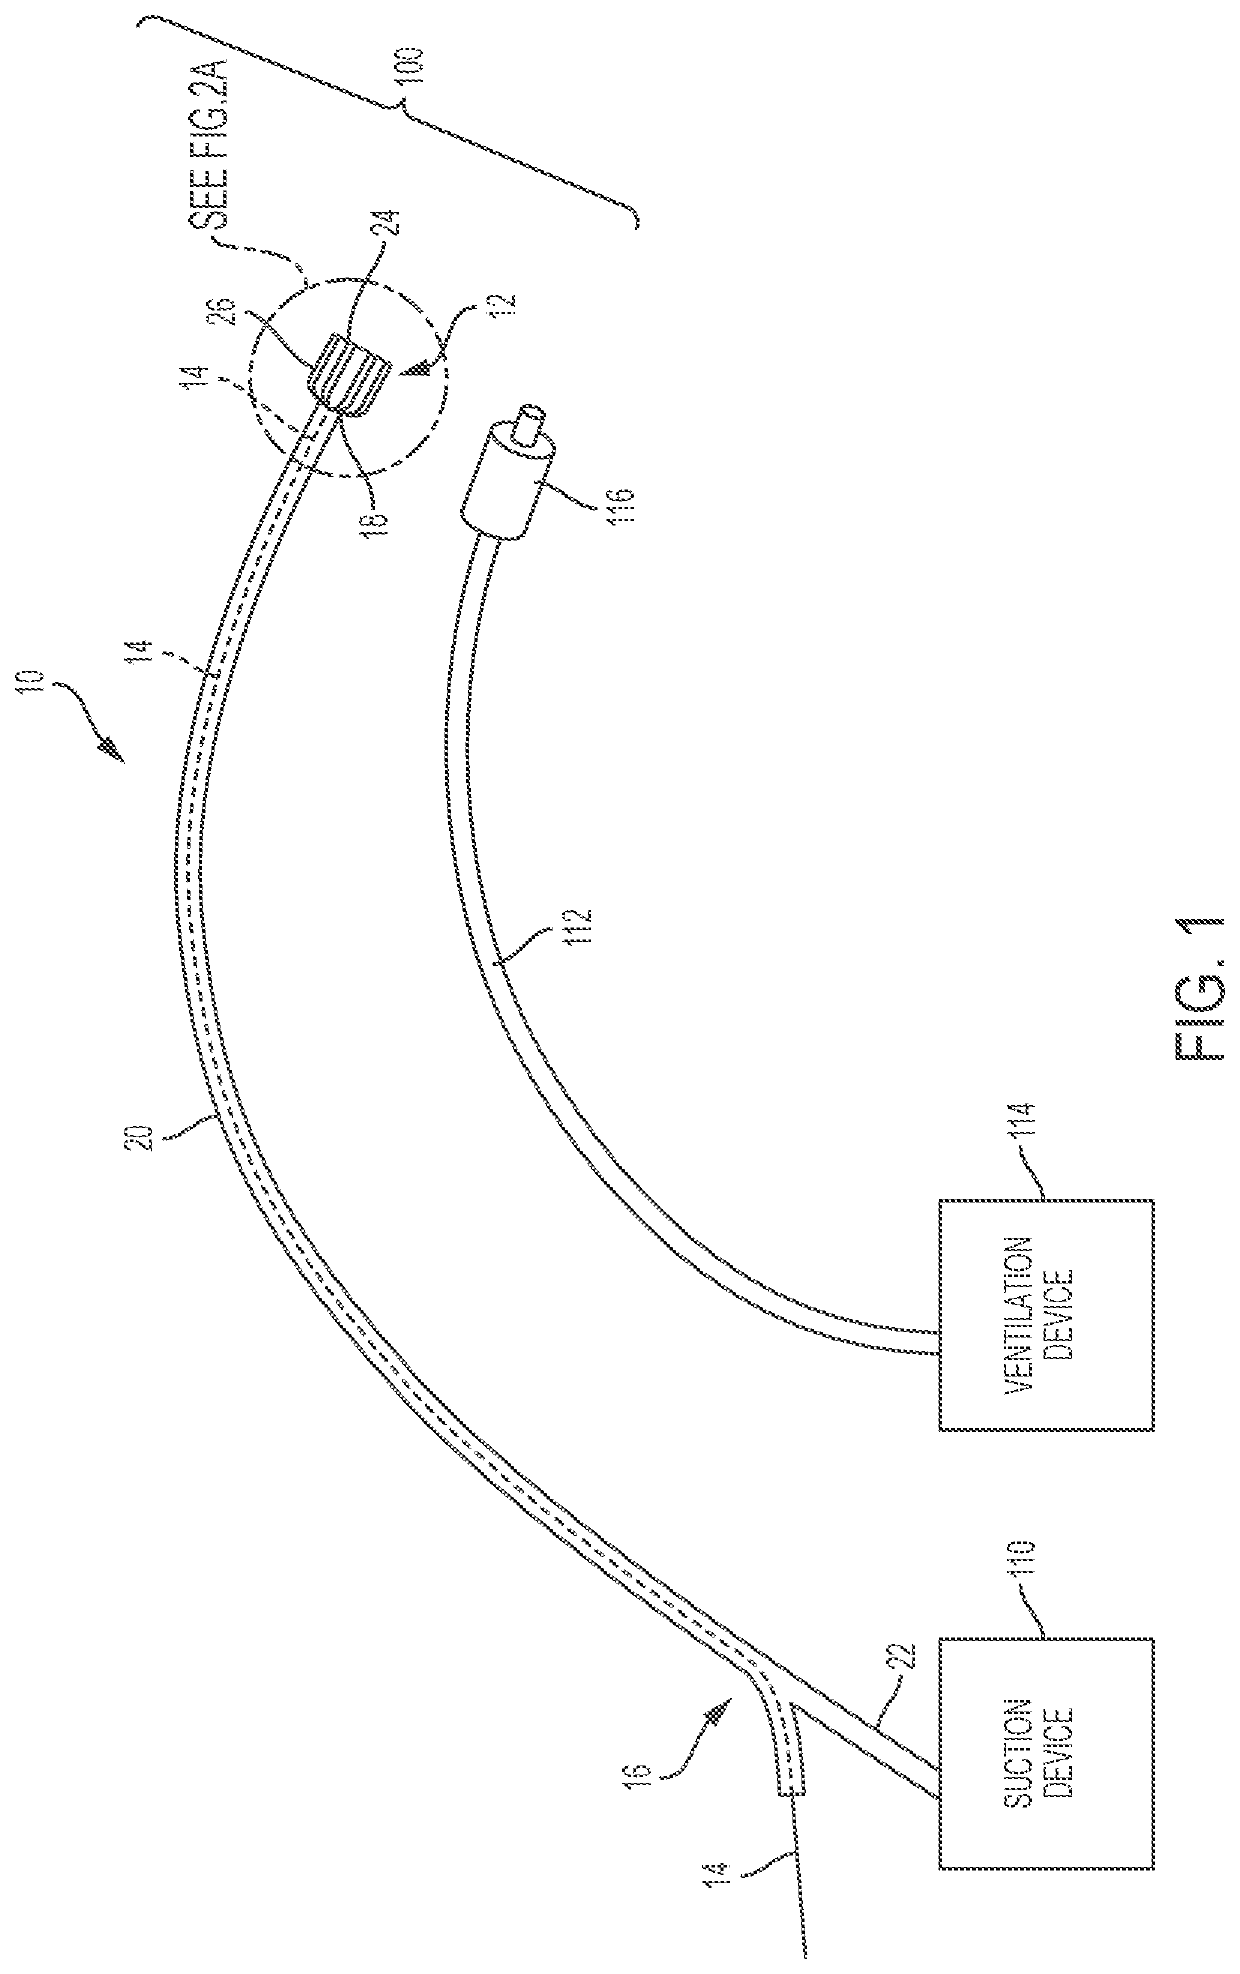 Esophageal Temporary Occlusion Device and Method for Endotracheal Intubation and Orogastric Tube Insertion